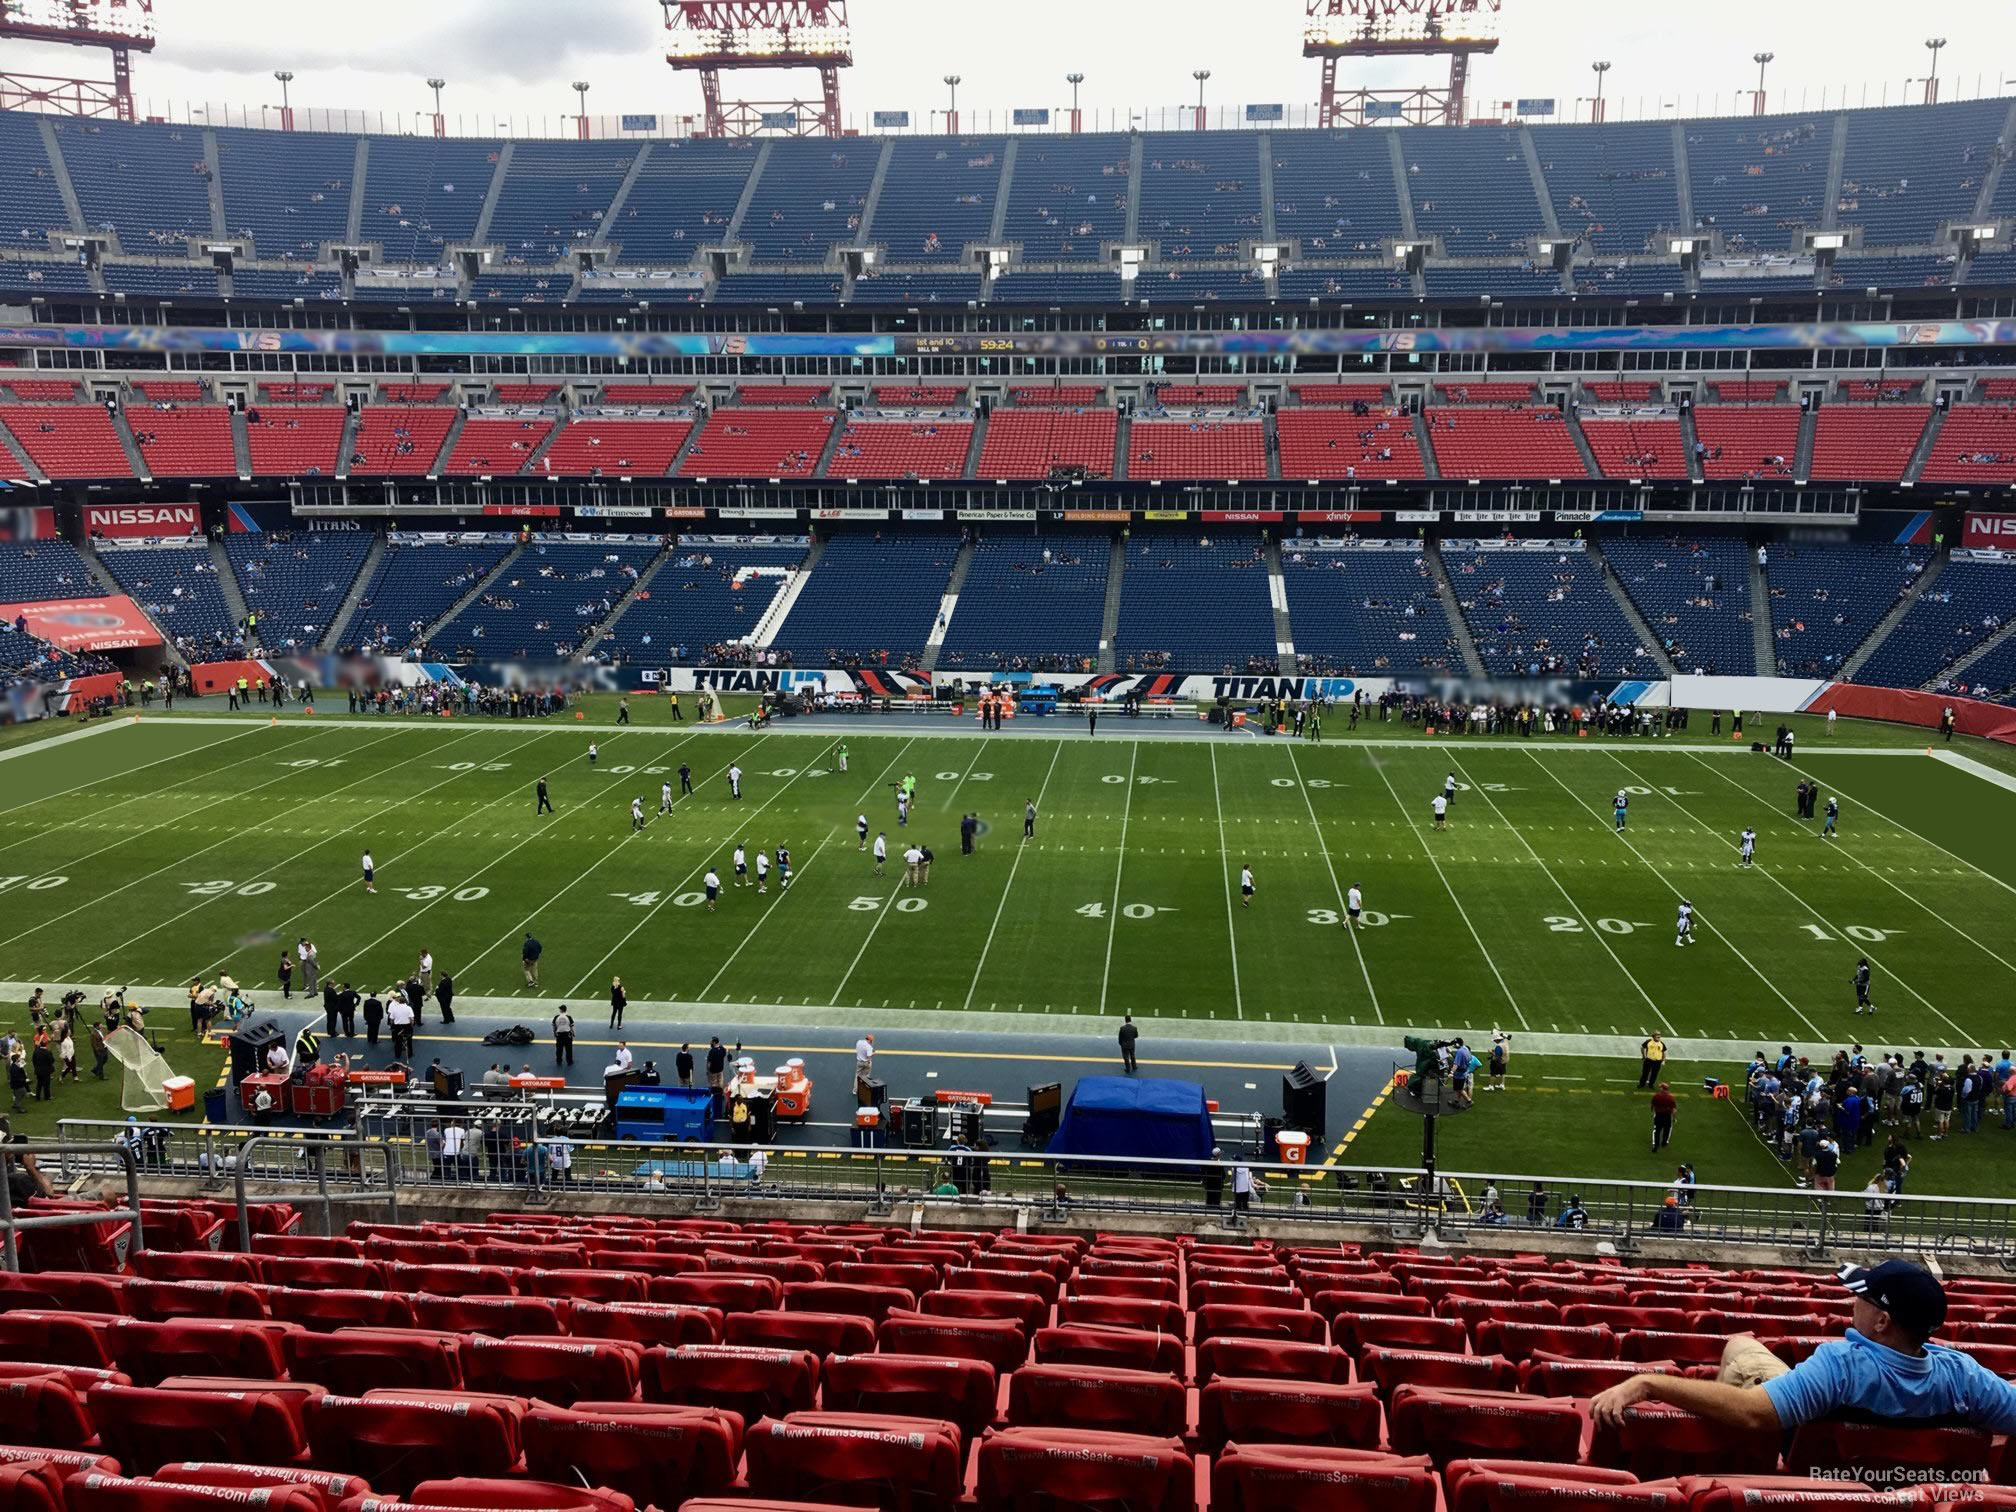 Section 236 at Nissan Stadium Tennessee Titans